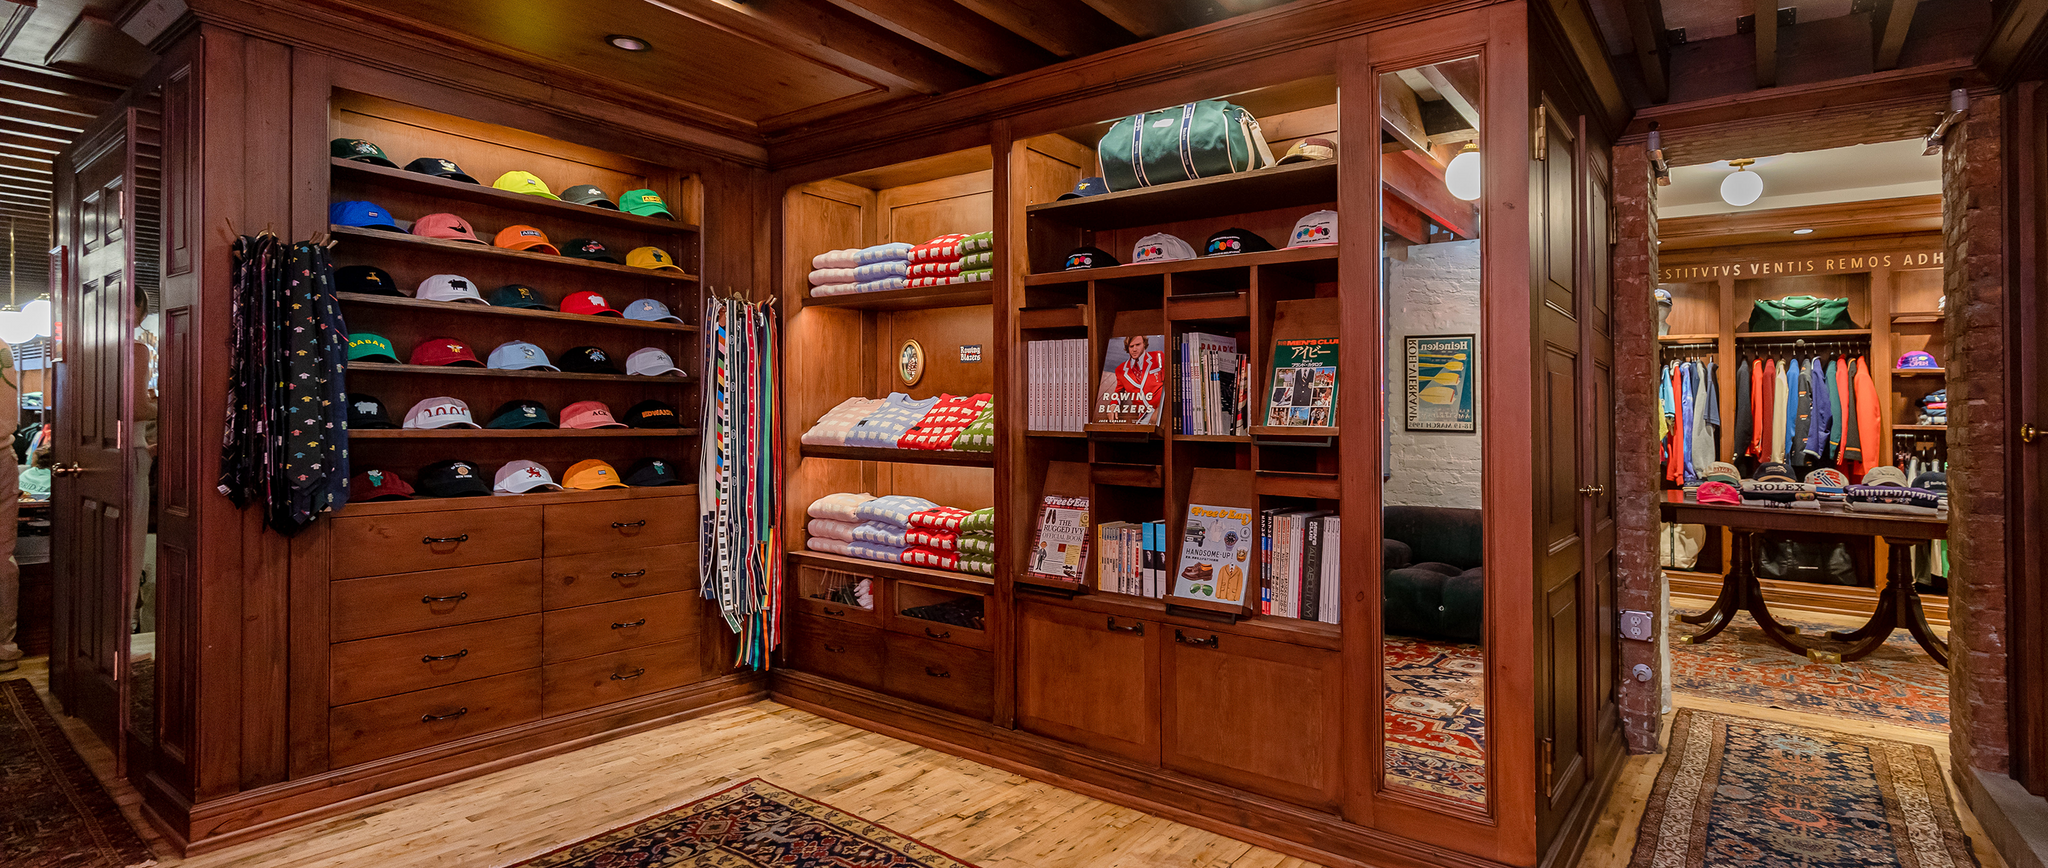 Interior view of the Rowing Blazers flagship location